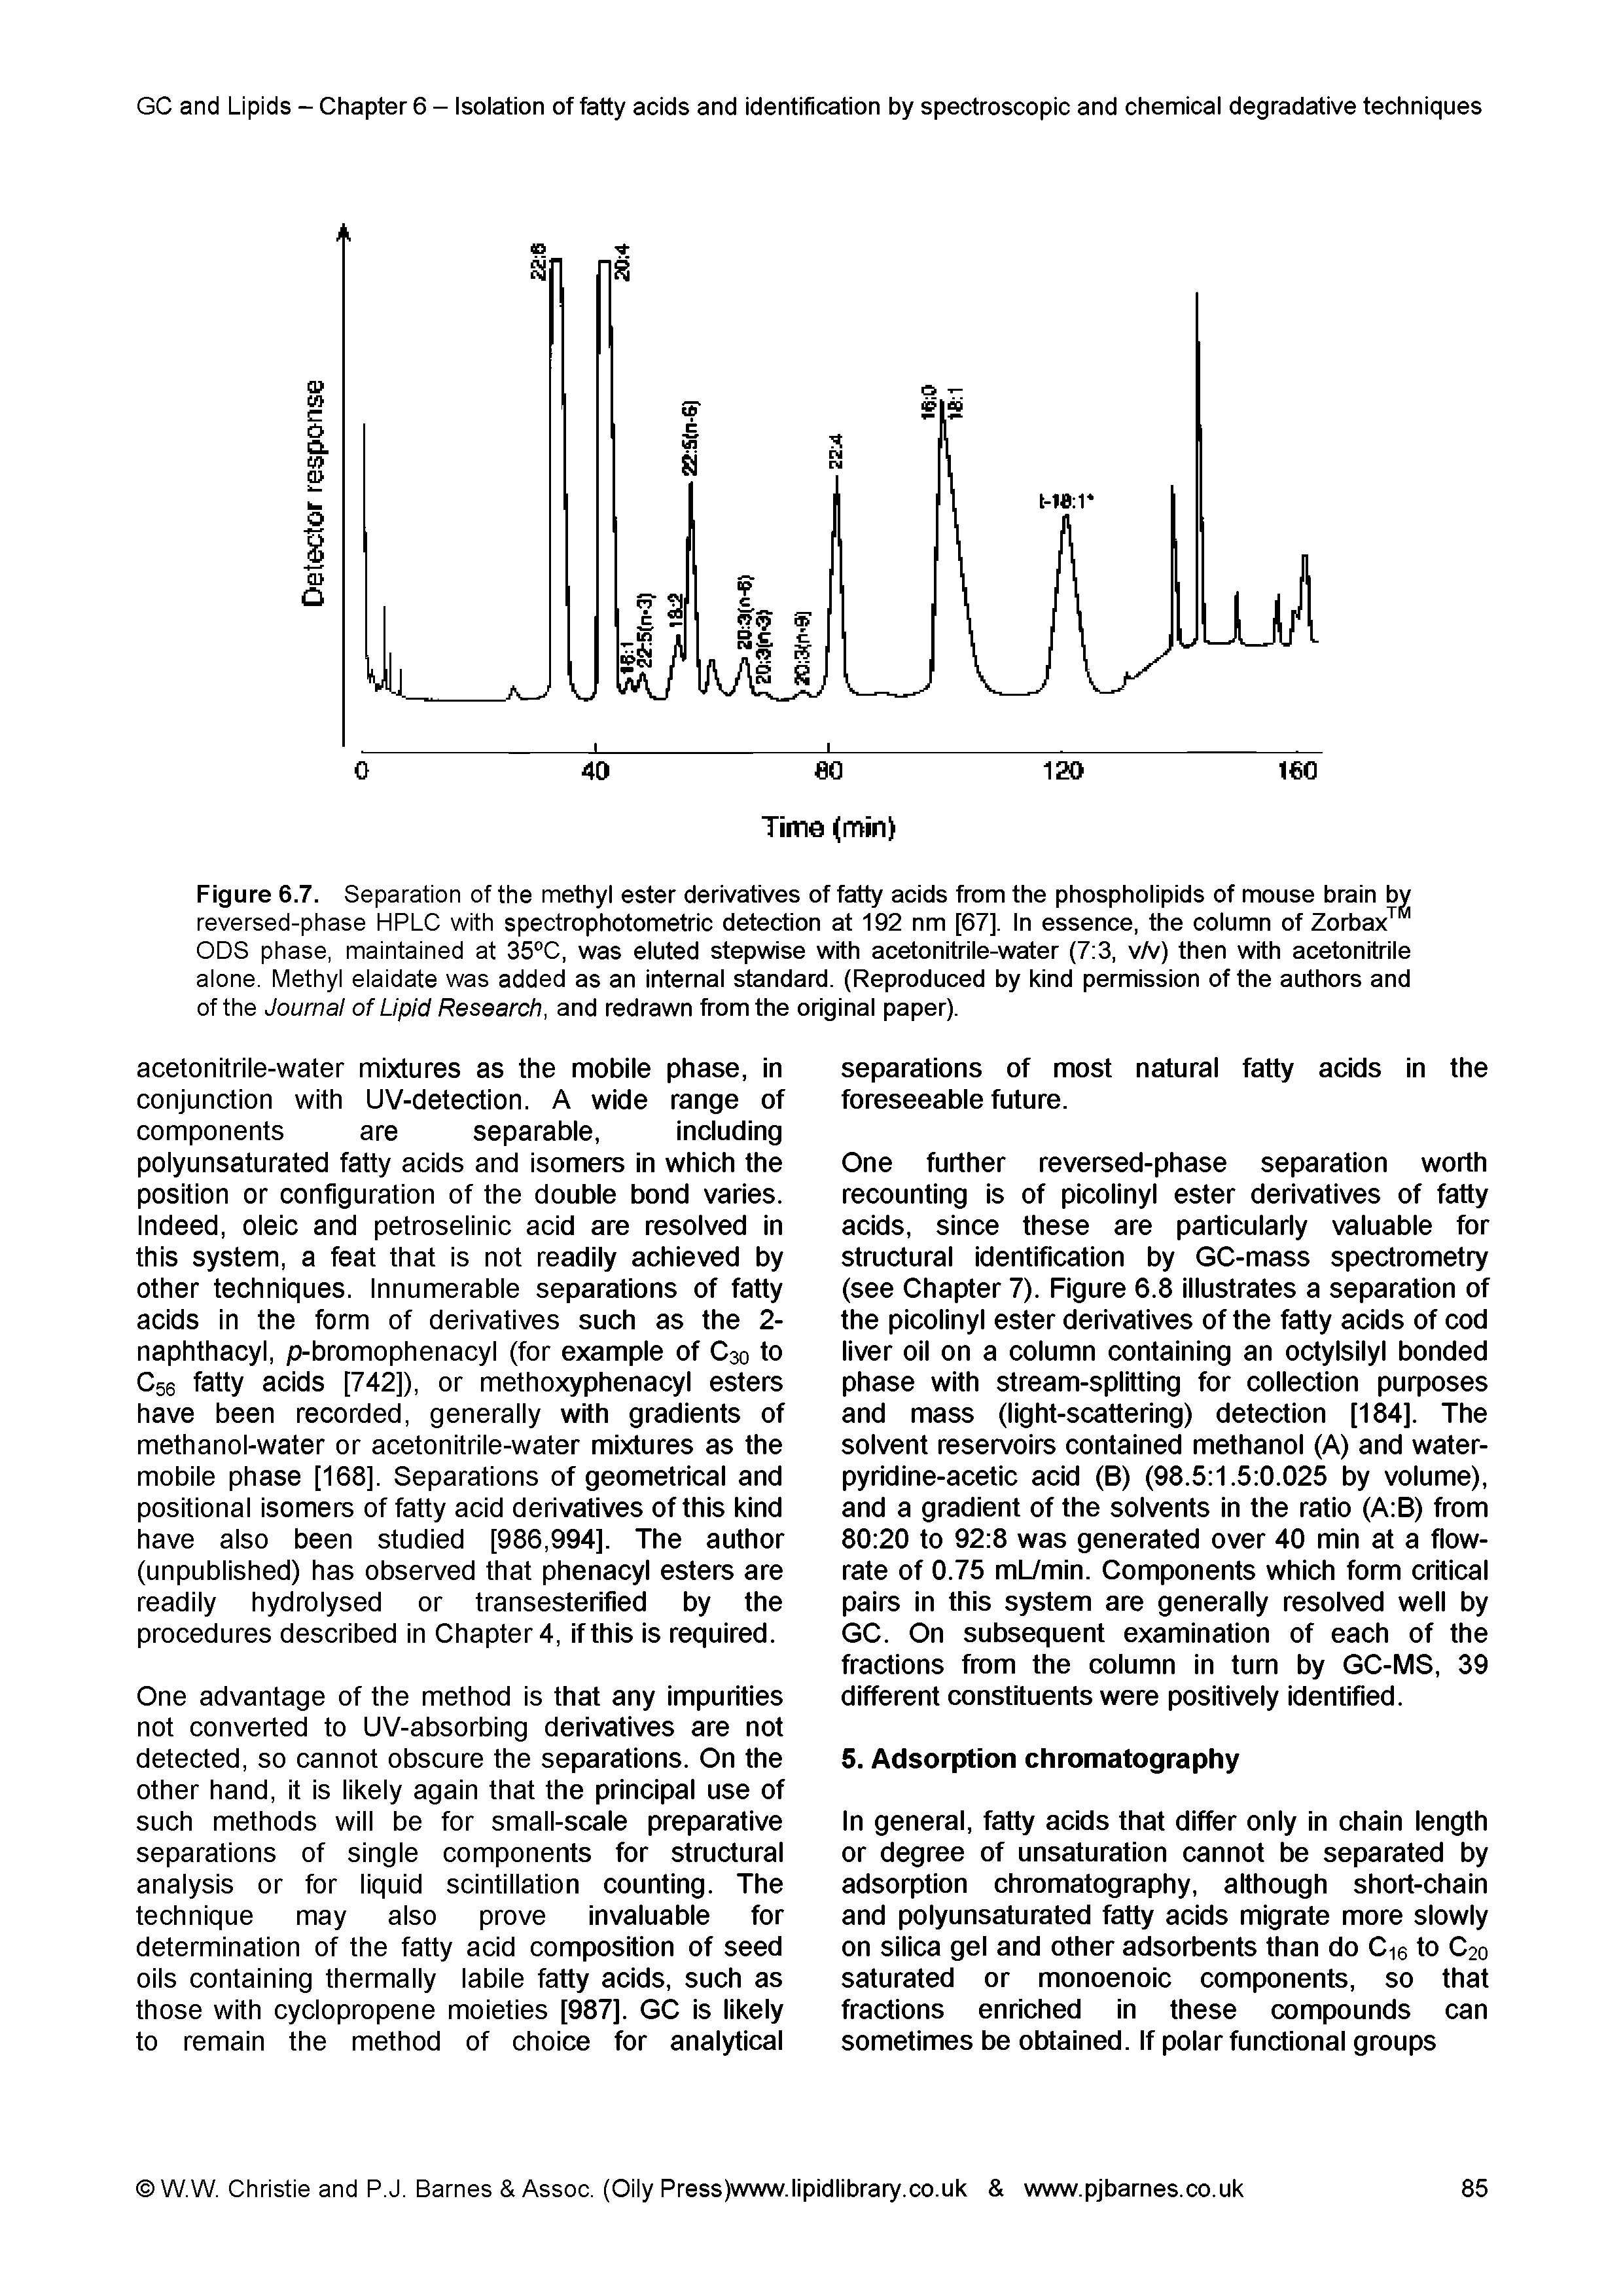 Figure 6.7. Separation of the methyl ester derivatives of fatty acids from the phospholipids of mouse brain by reversed-phase HPLC with spectrophotometric detection at 192 nm [67]. In essence, the column of Zorbax ODS phase, maintained at 35 C, was eluted stepwise with acetonitrile-water (7 3, v/v) then with acetonitrile alone. Methyl elaldate was added as an internal standard. (Reproduced by kind permission of the authors and of the Journal of Lipid Research, and redrawn from the original paper).